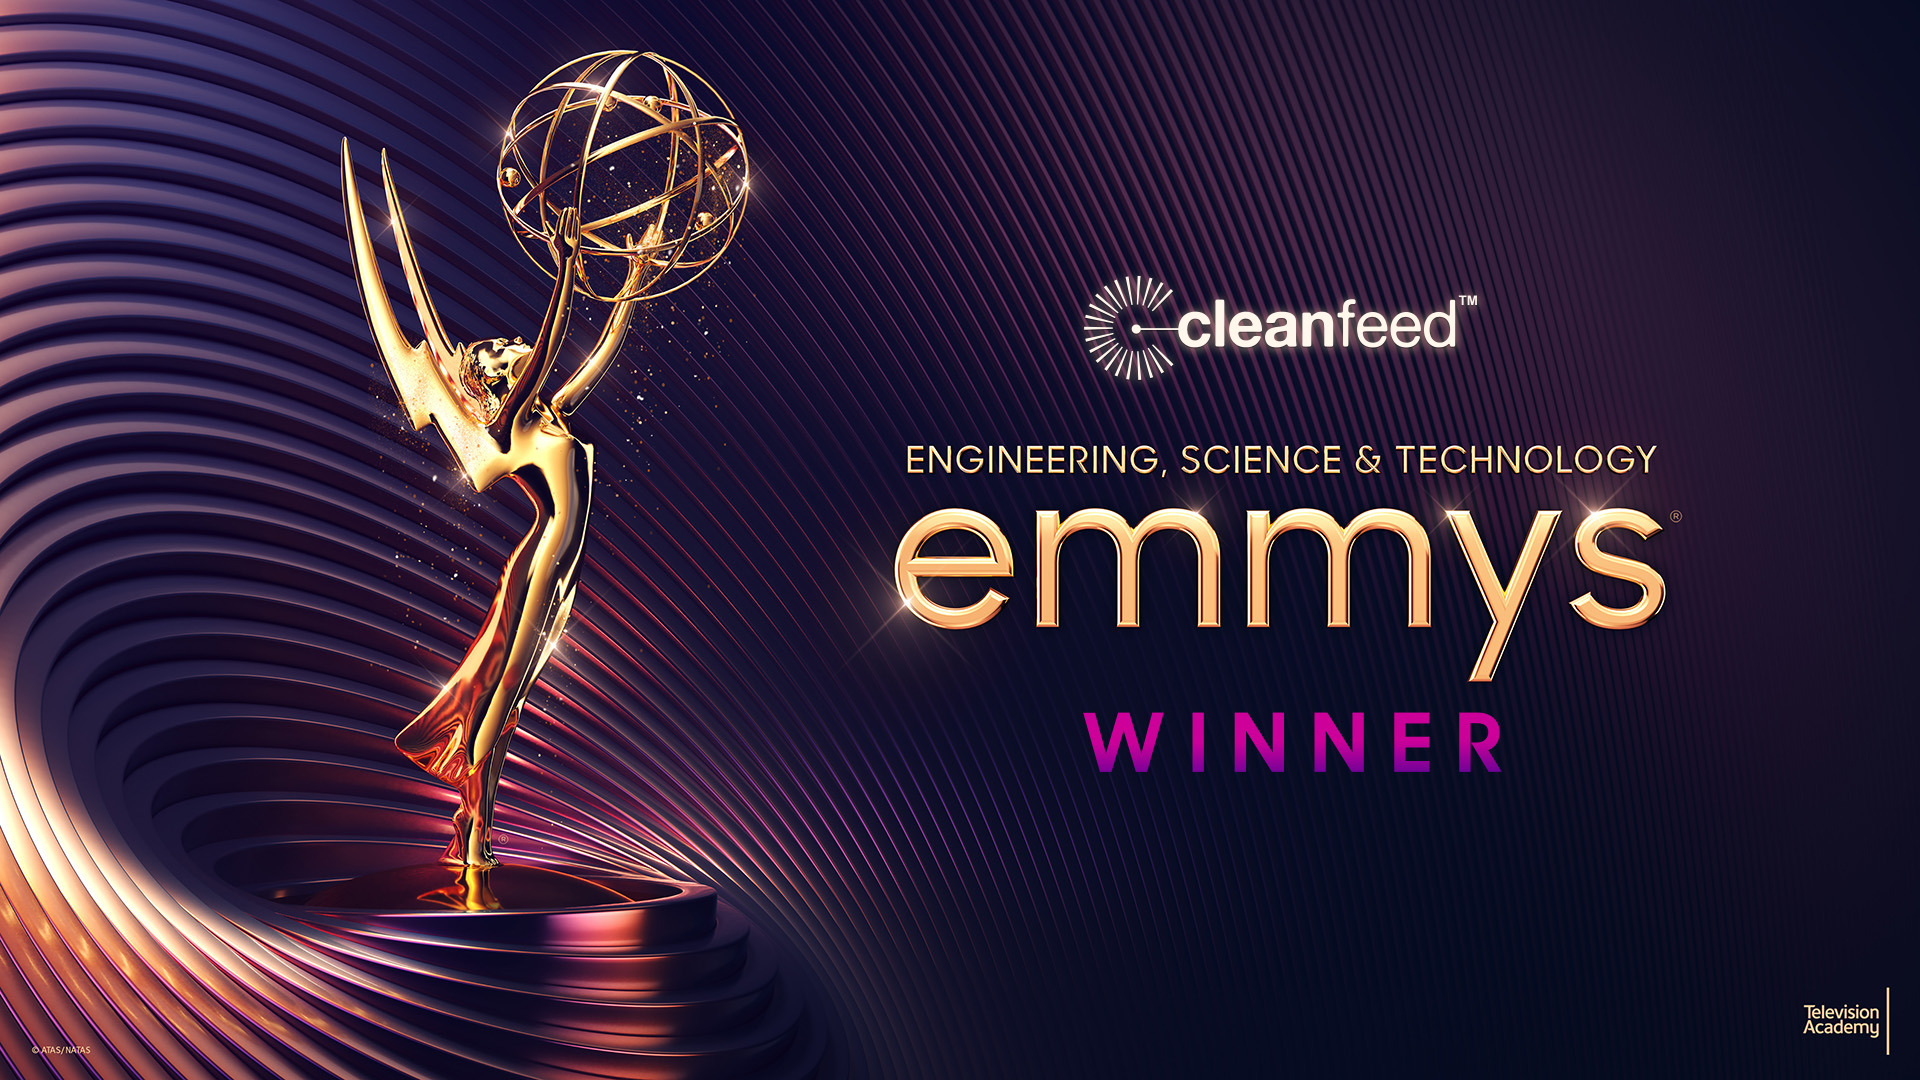 Cleanfeed wins Emmy 4